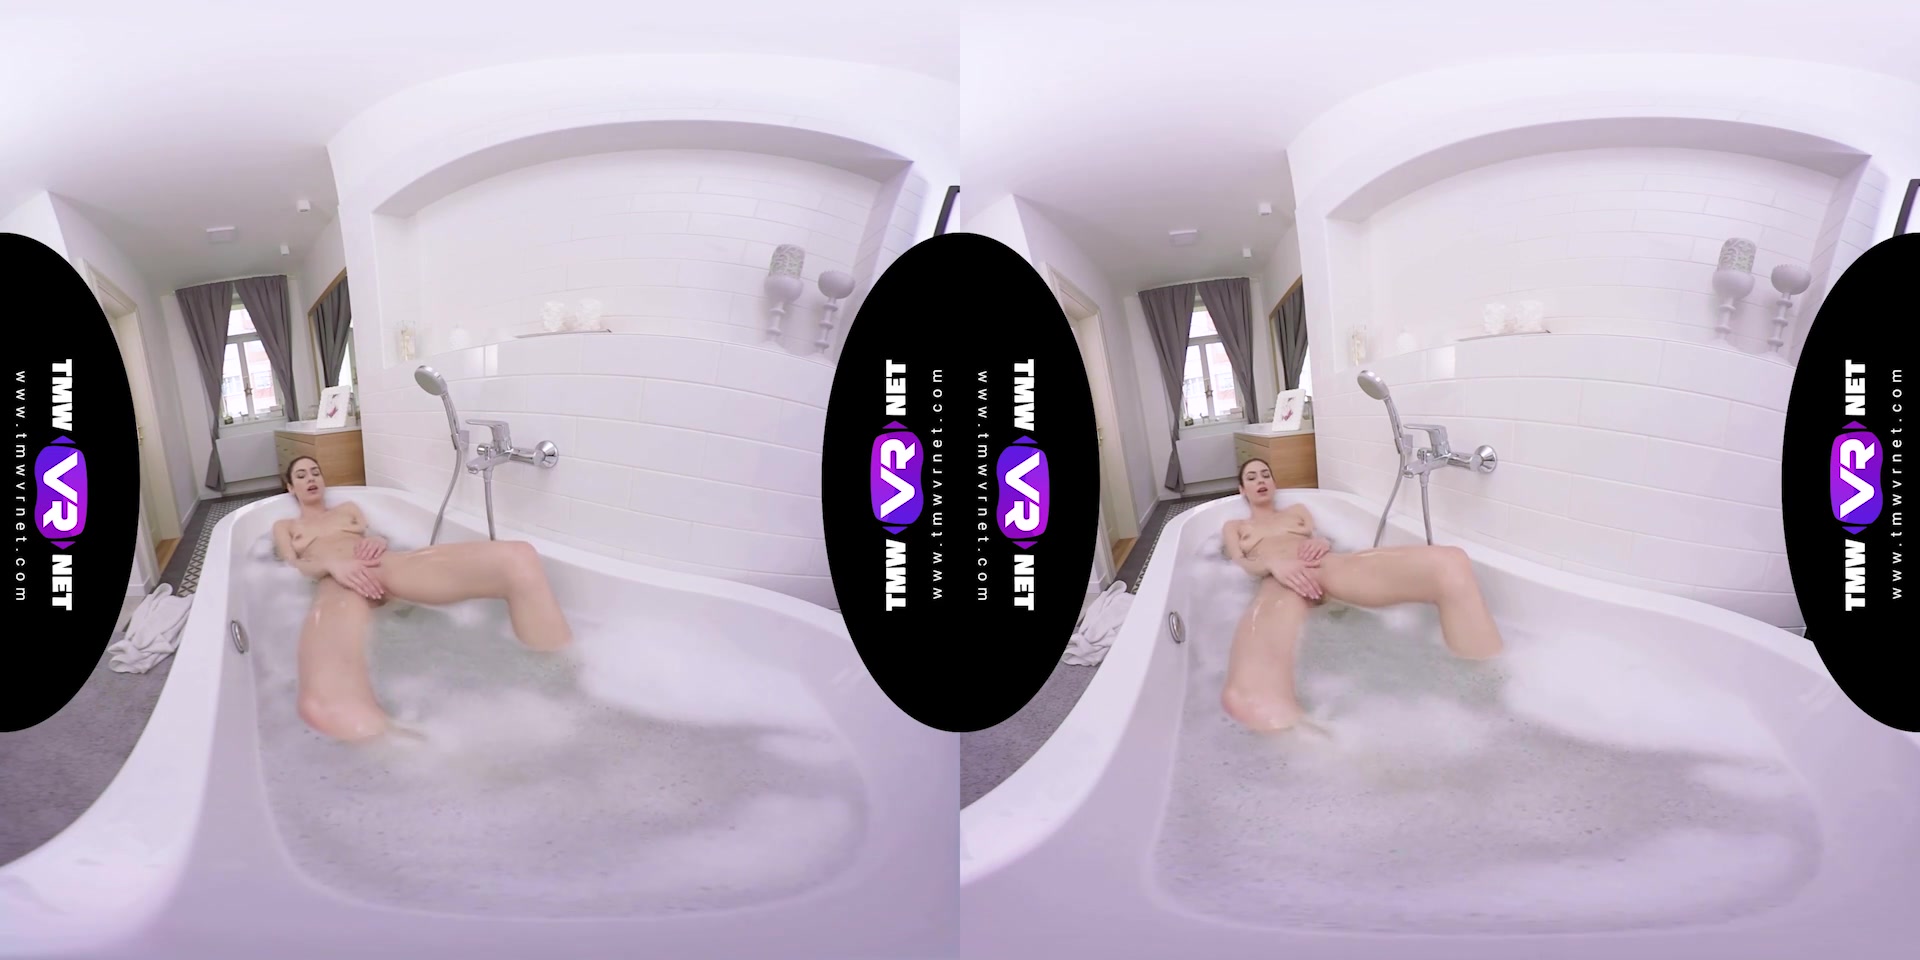 Arwen Gold in The Most Sensual Bath Solo By Arwen Gold In Vr - TMWVRNet